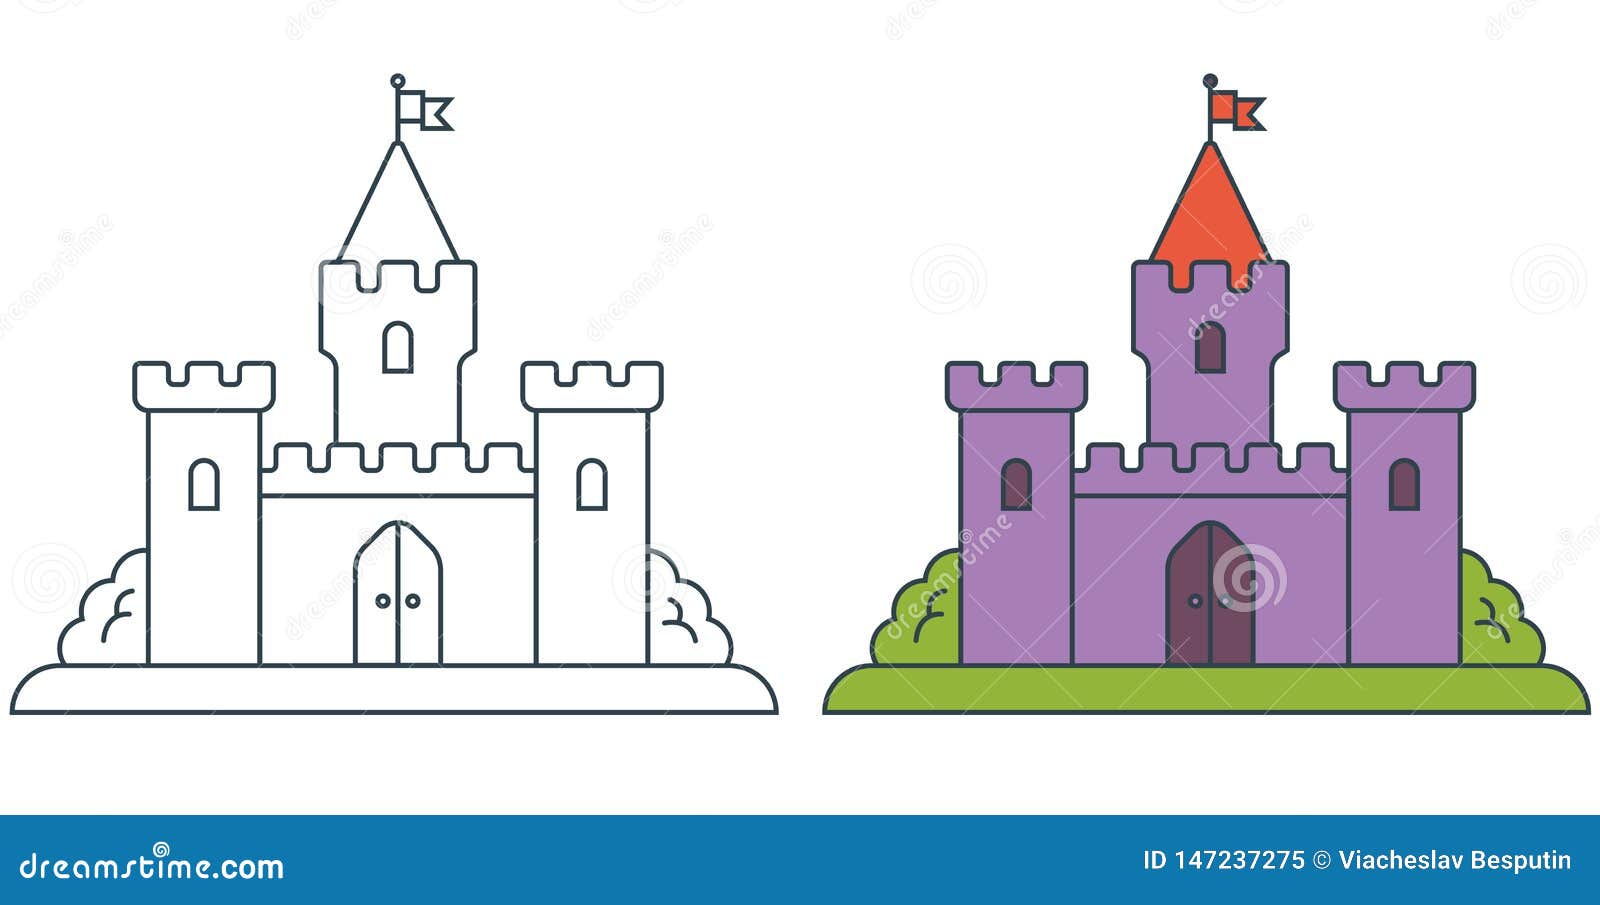 image-of-a-medieval-castle-stock-vector-illustration-of-cathedral-147237275